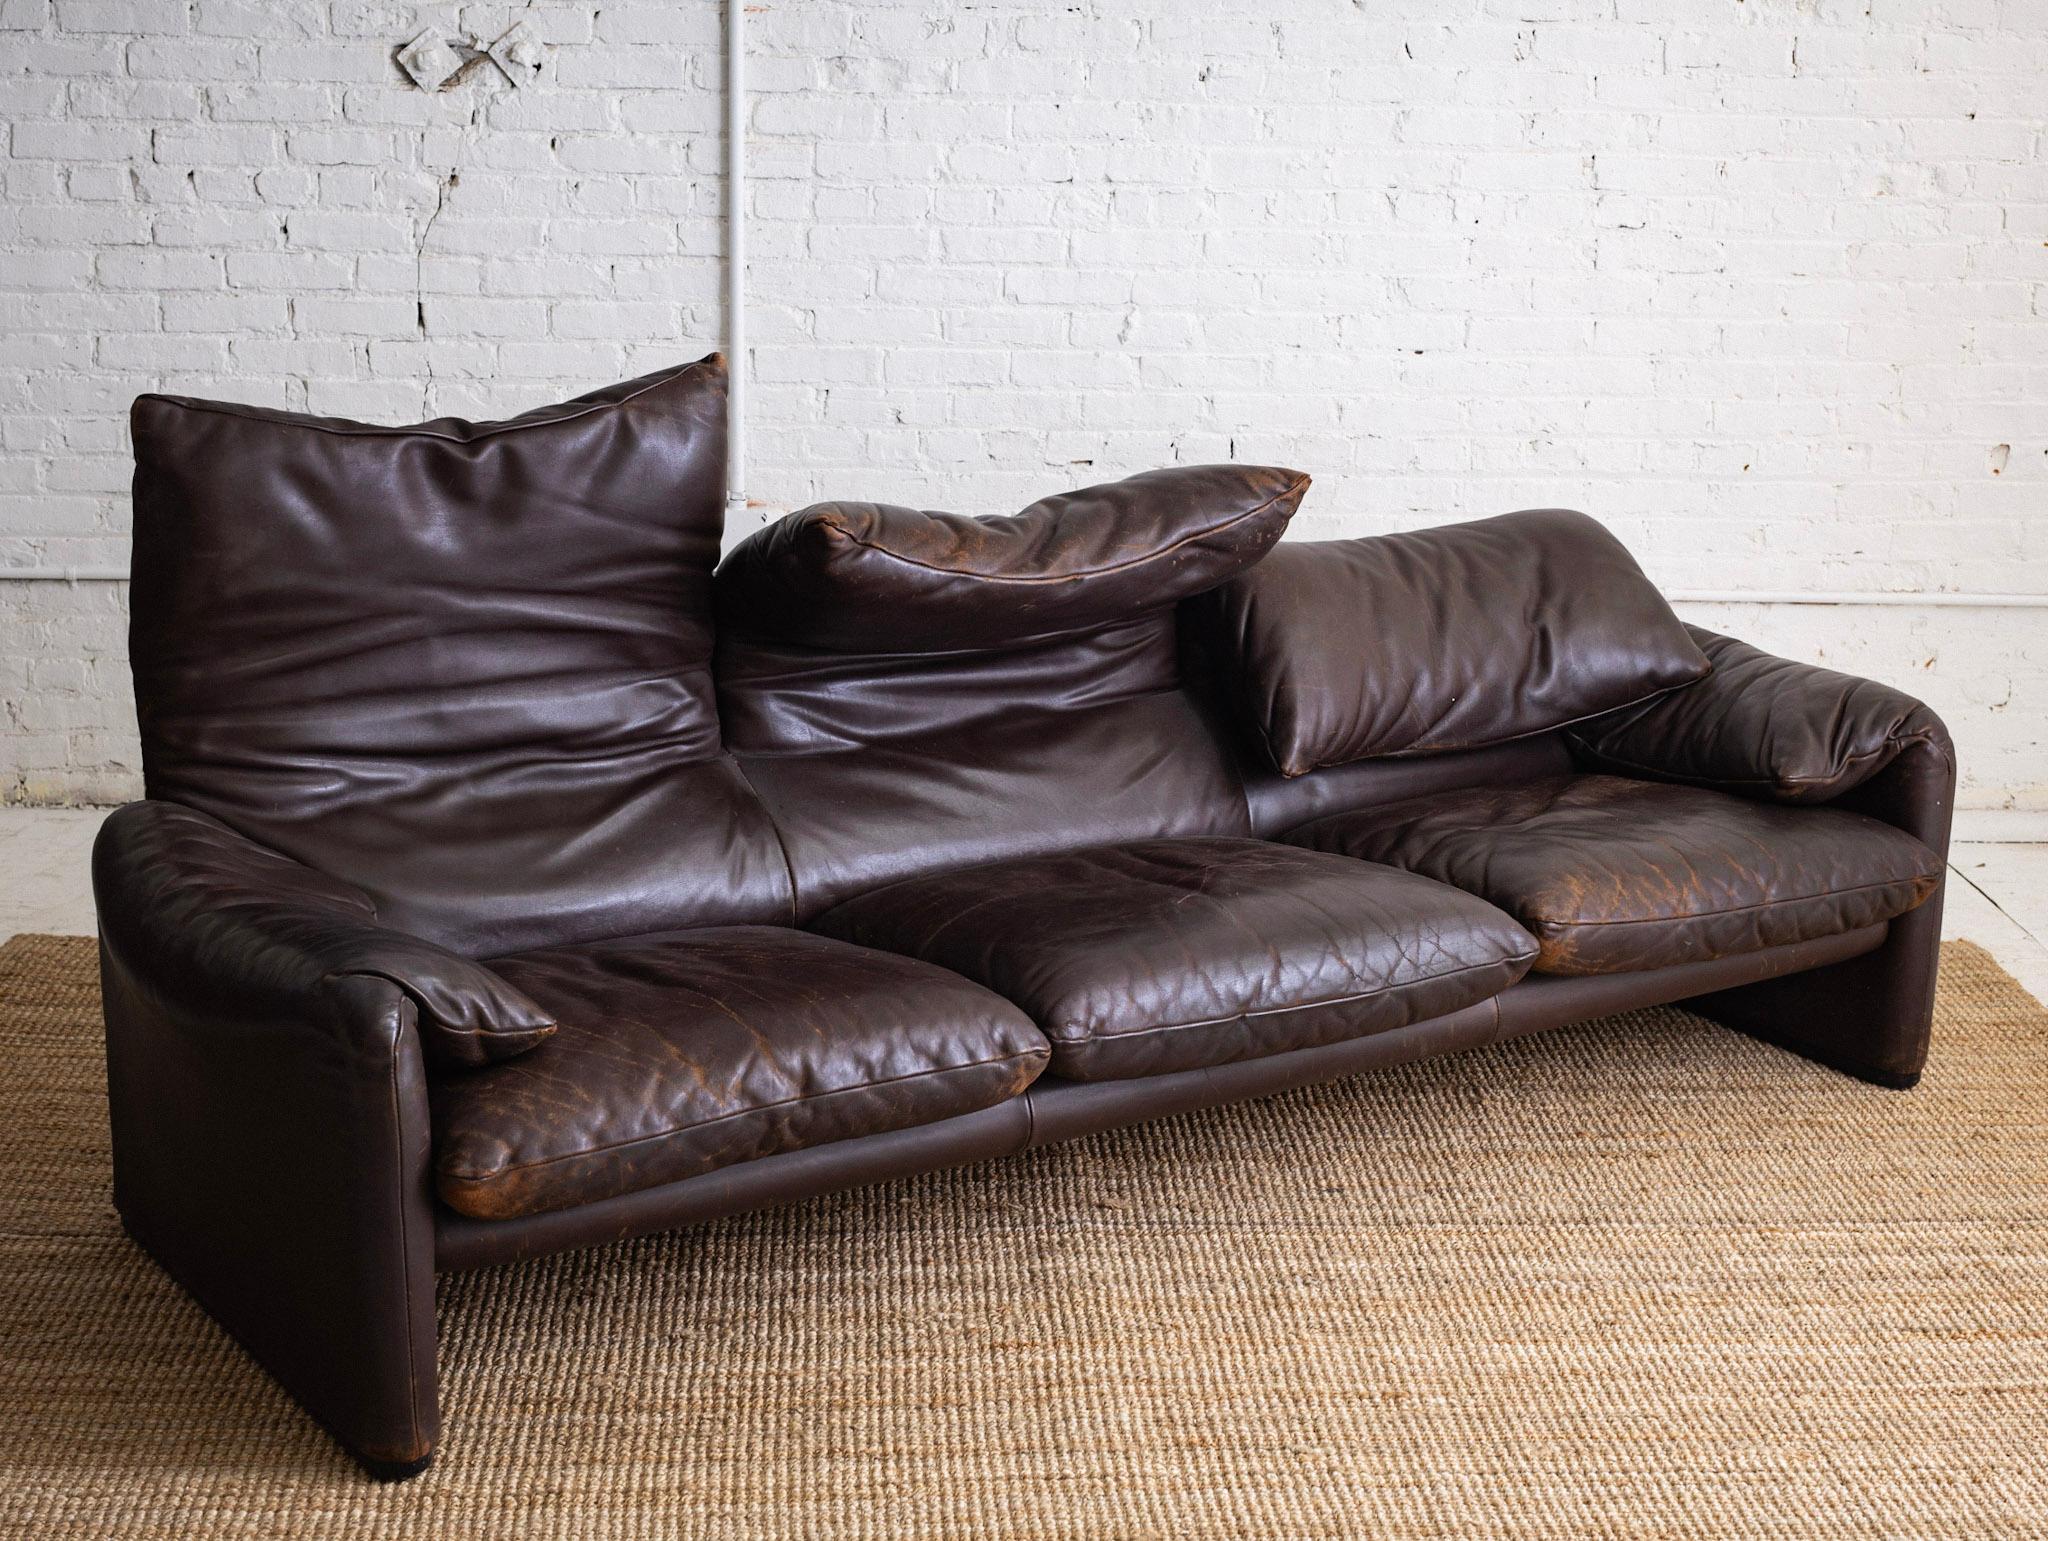 Space Age Maralunga 3 Seat Sofa by Vico Magistretti for Cassina in Chocolate Brown Leather